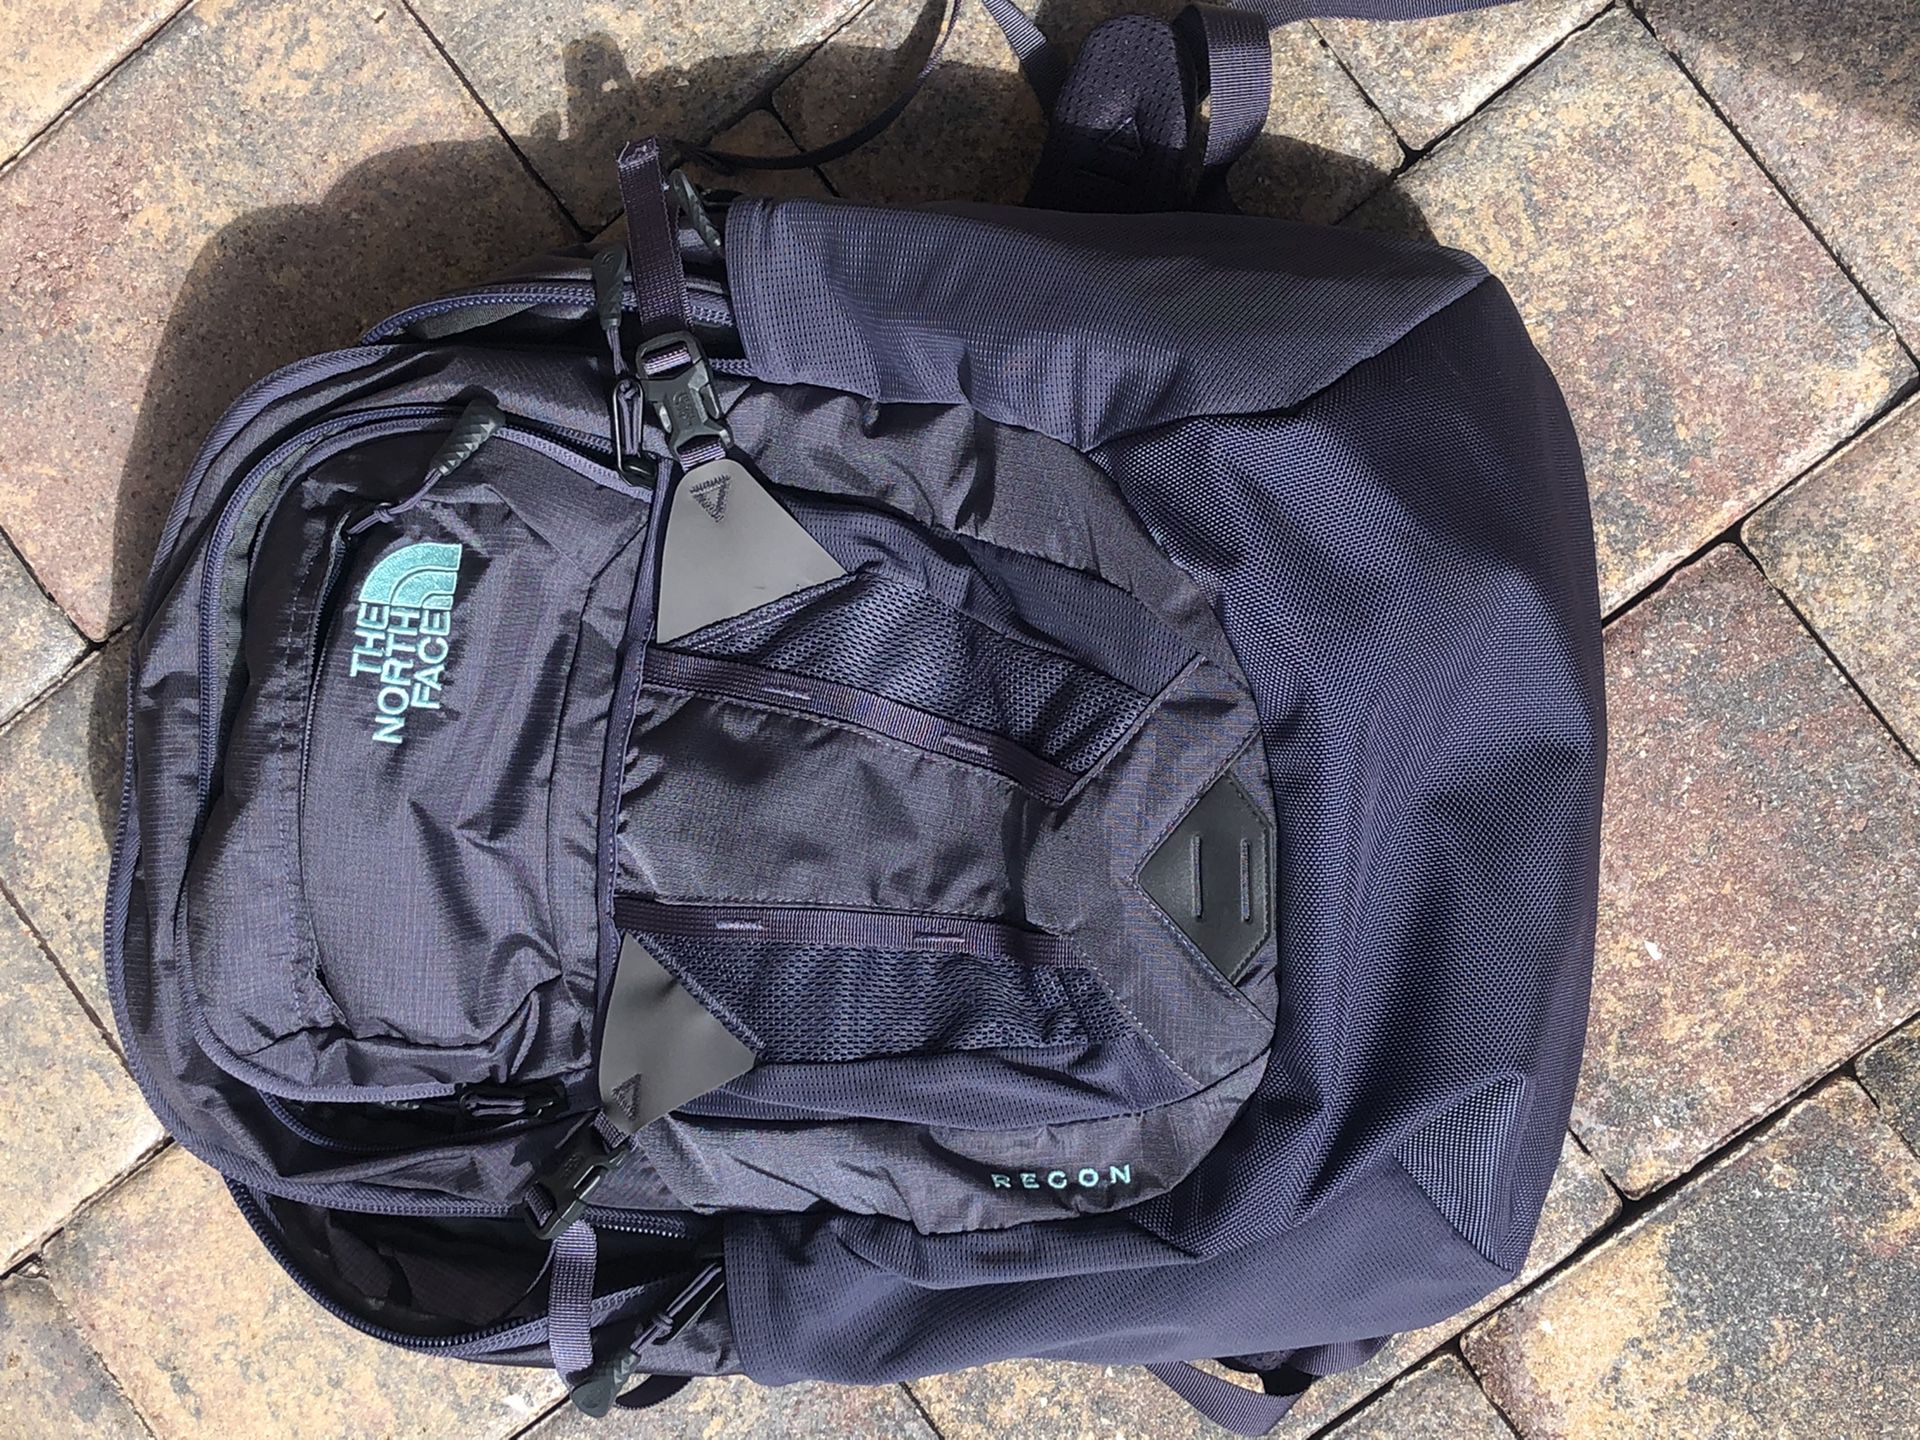 North Face Recon backpack - like new